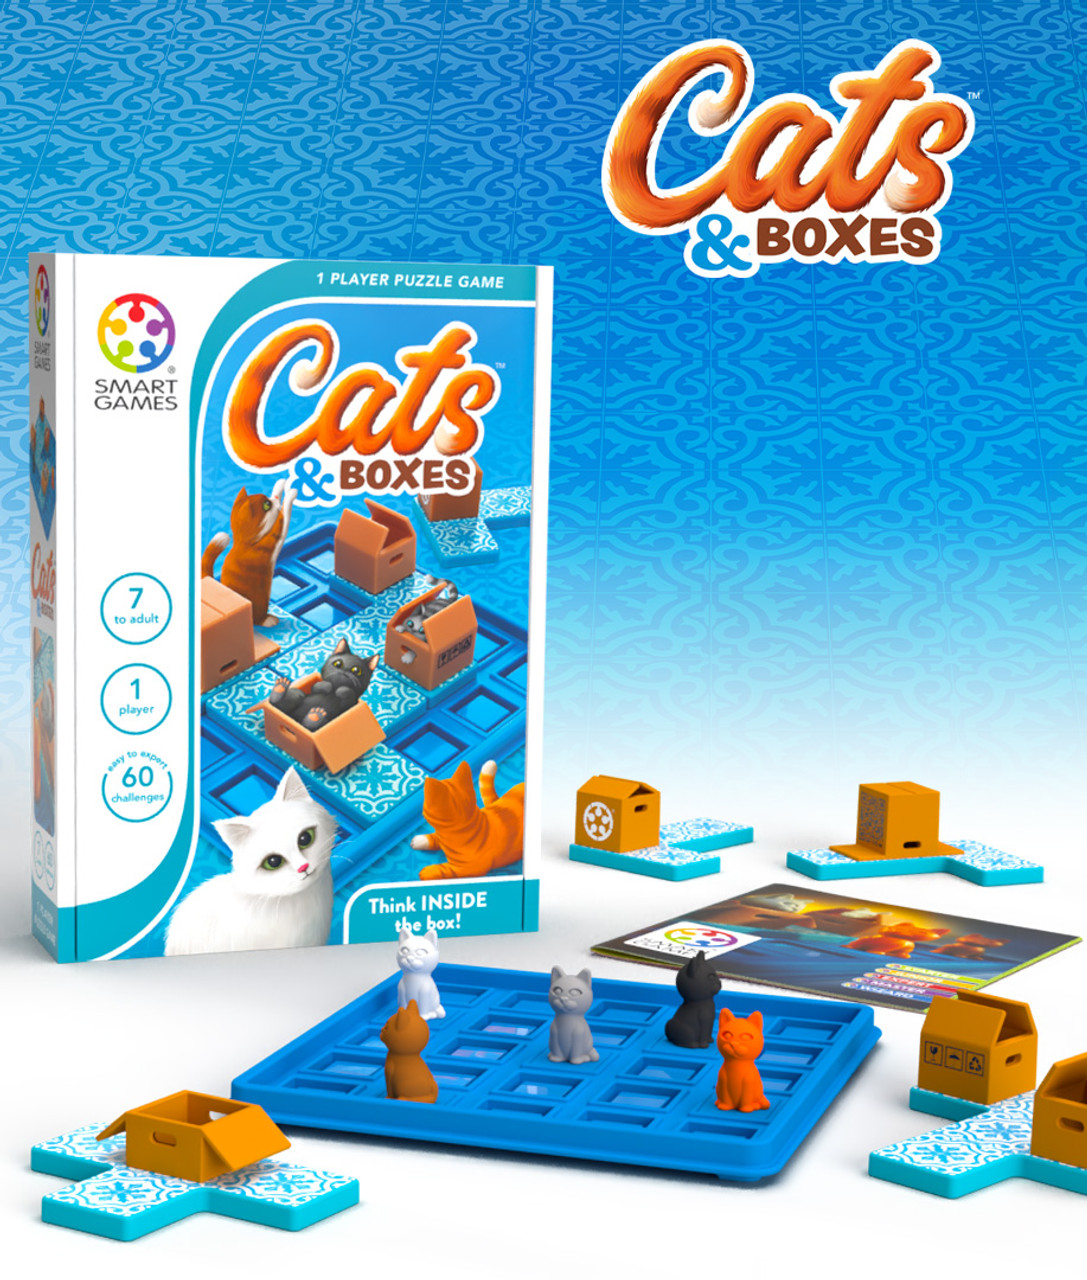 Travel-Friendly Educational Toys: Cats & Boxes features 60 challenges in a compact size and portable travel case.